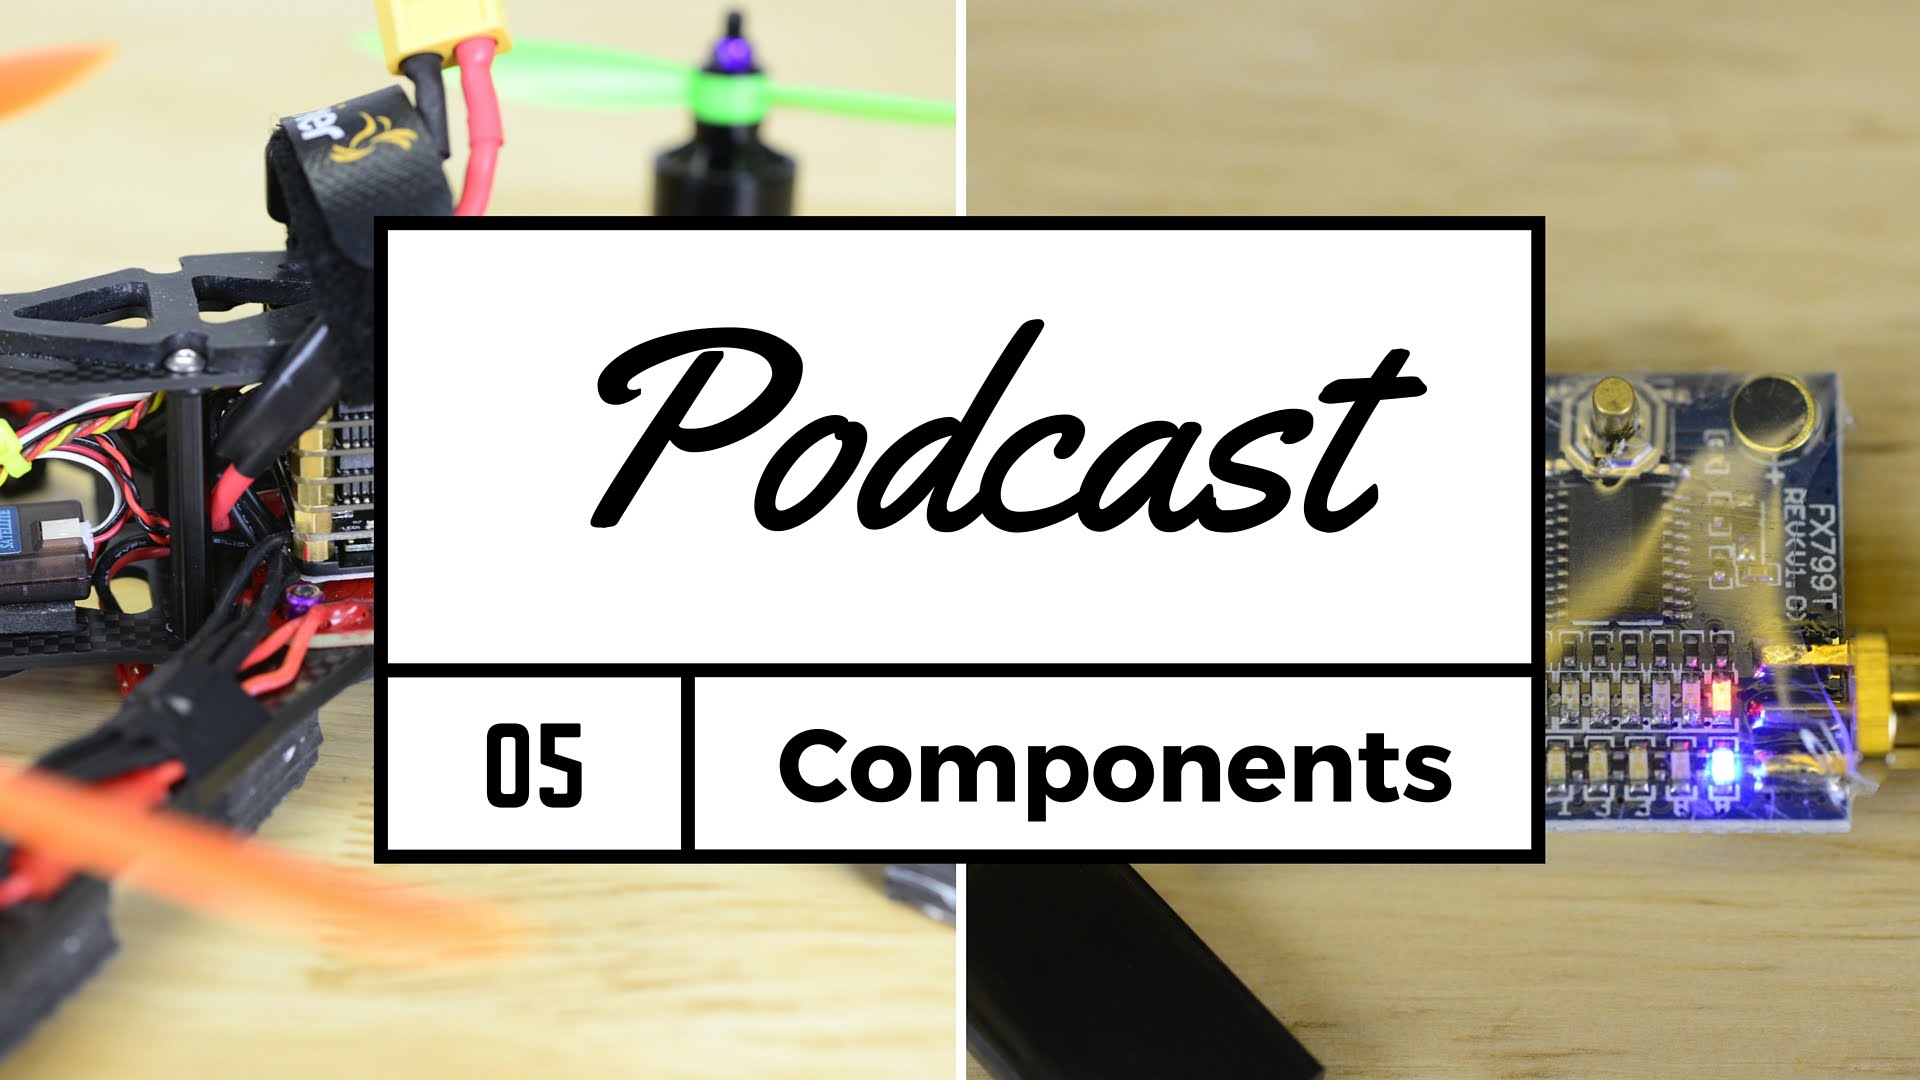 FPV Podcast 5 – Intro to components to build a quadcopter – Part 2 of 2